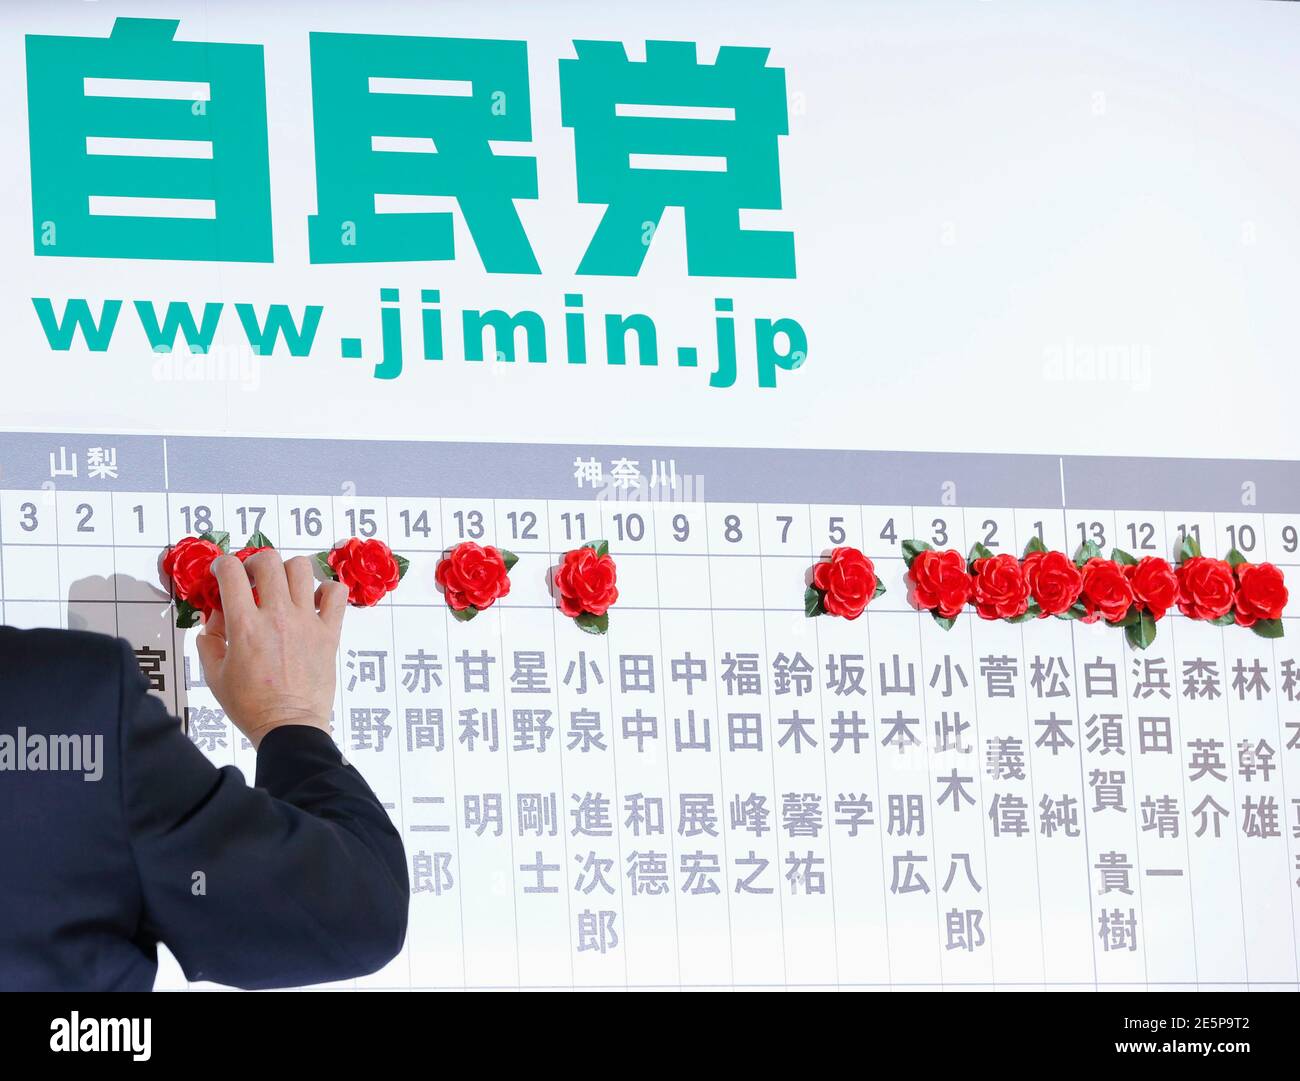 Japan's main opposition Liberal Democratic Party's (LDP) Secretary General  Shigeru Ishiba puts paper roses on names of candidates, who are expected to  win at the LDP headquarters in Tokyo December 16, 2012.